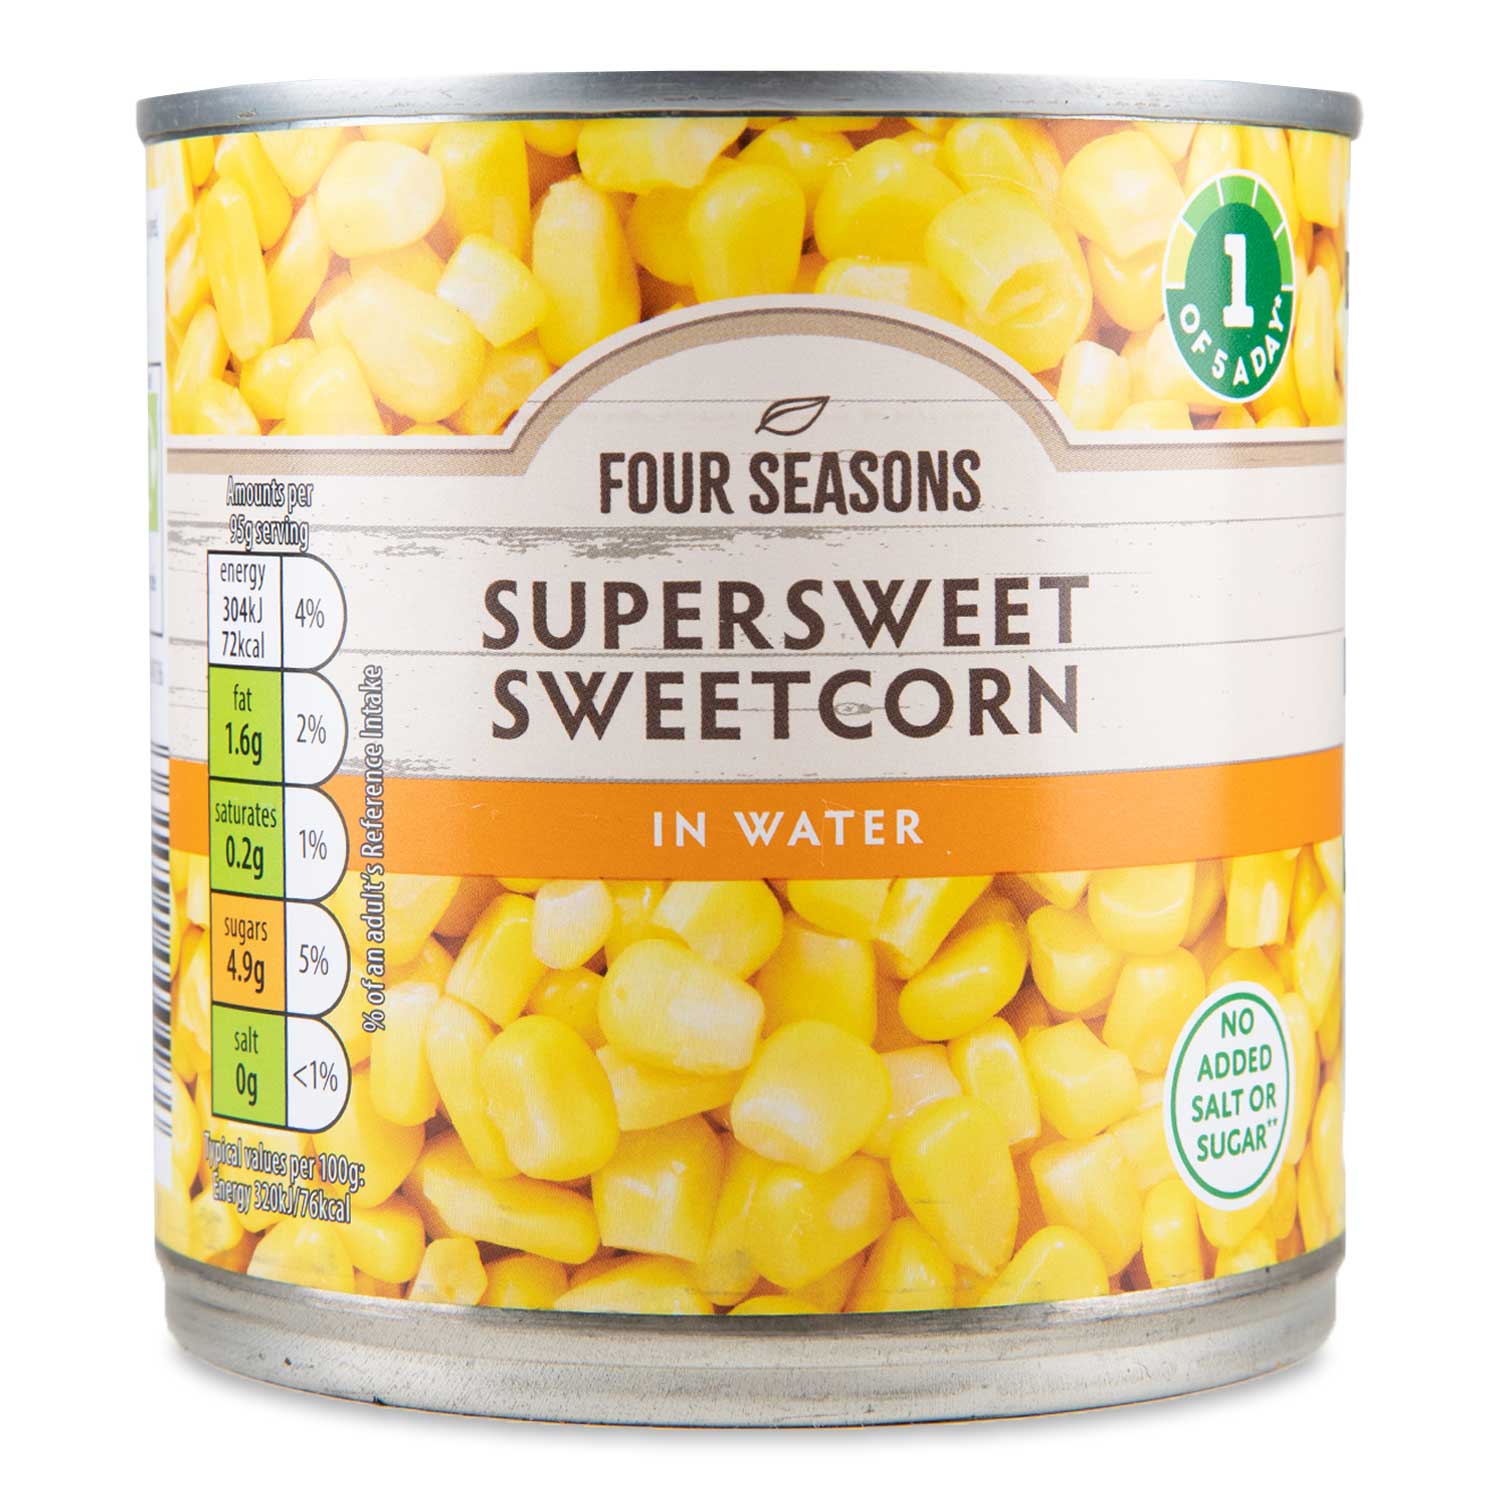 Four Seasons Supersweet Sweetcorn In Water 325g (260g Drained)